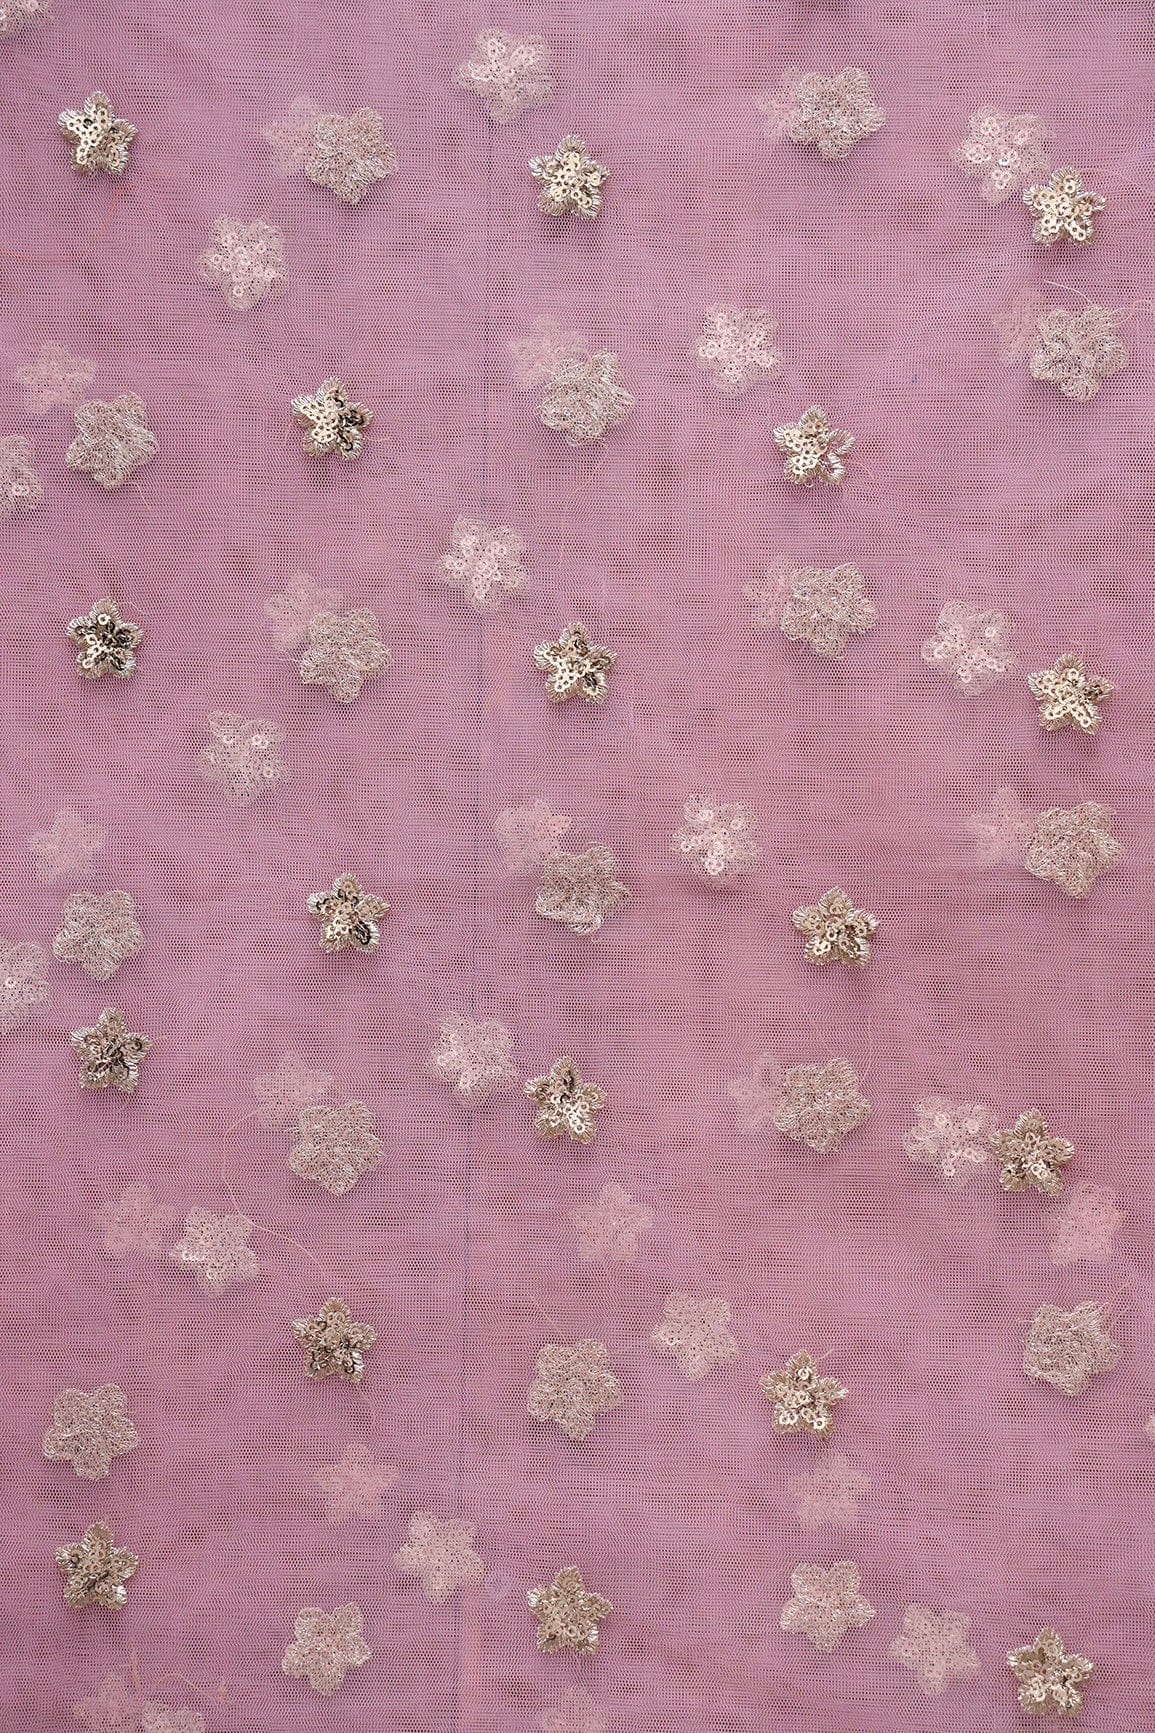 doeraa Embroidery Fabrics 1 Meter Cut Piece Of Gold Sequins With Gold Zari Small Floral Embroidery Work On Pink Soft Net Fabric